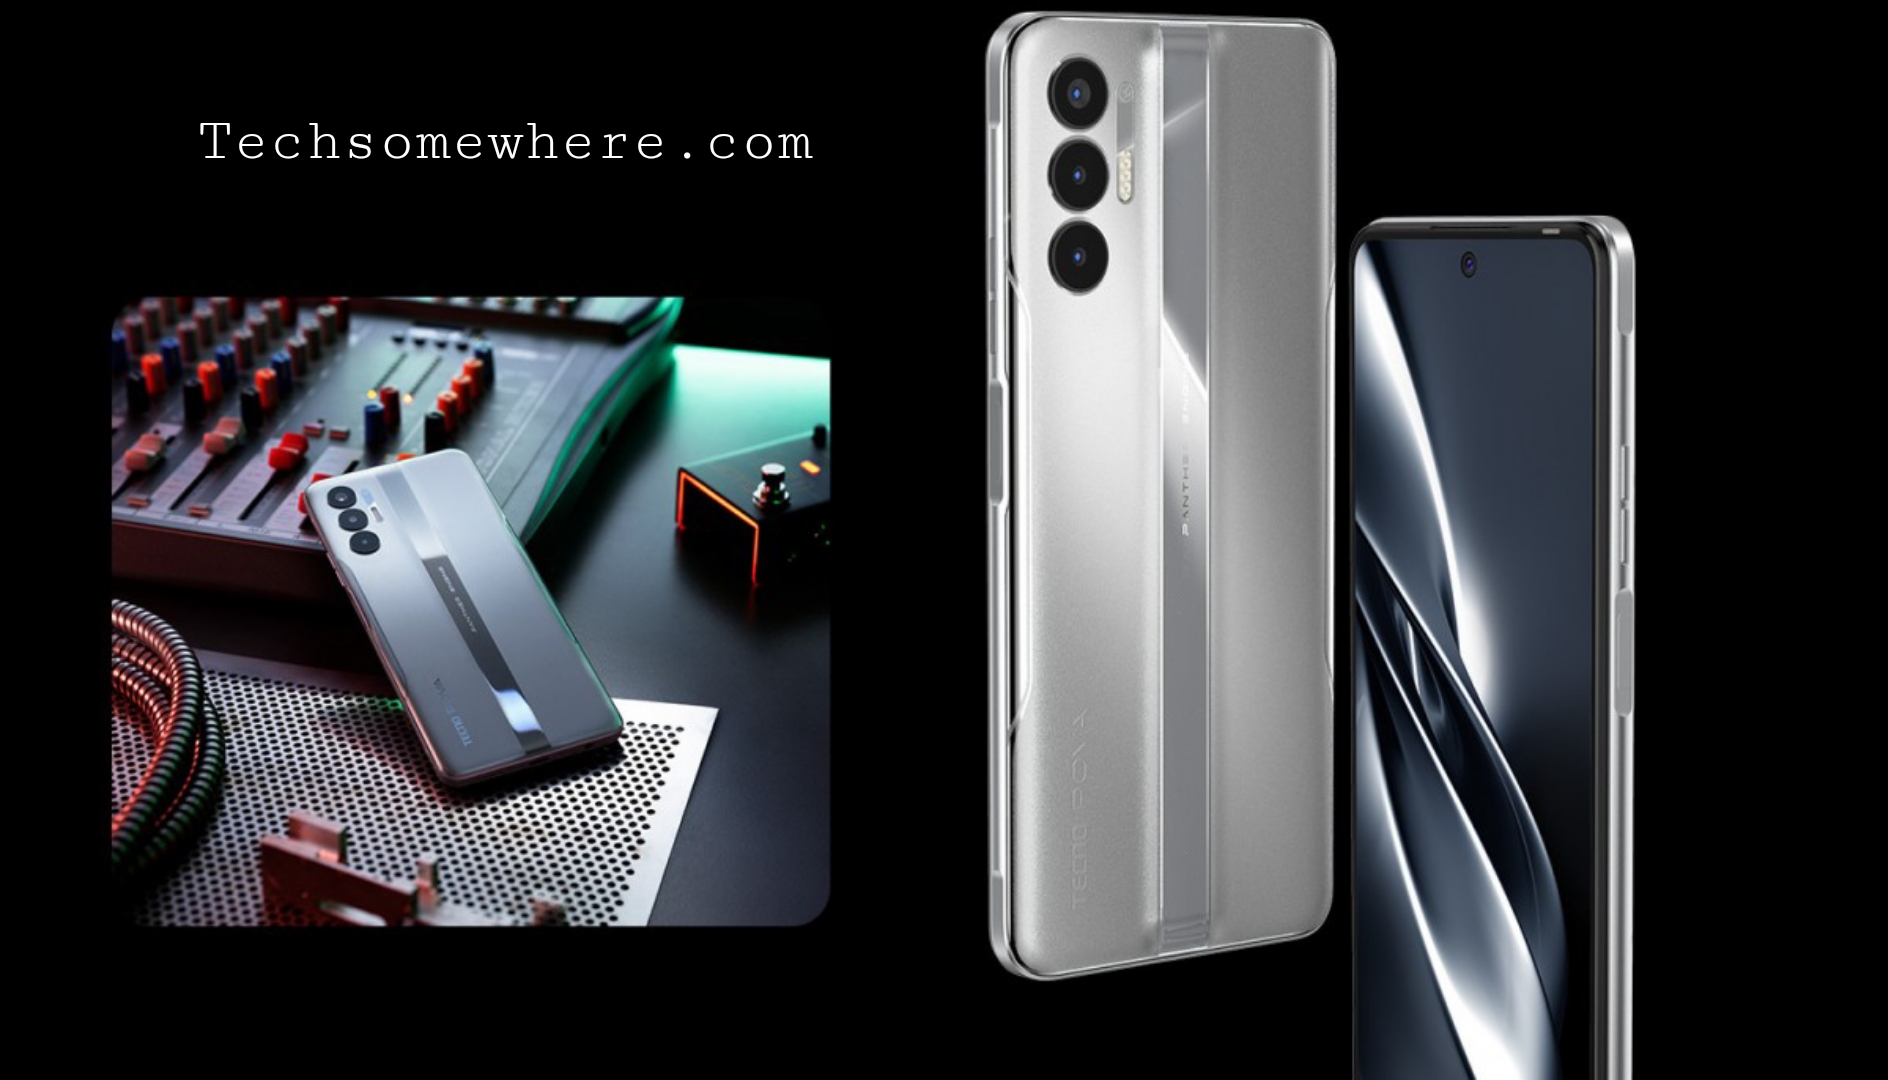 Upcoming Tecno Pova 3 with 7000mAh Battery, Price And All Massive Details!